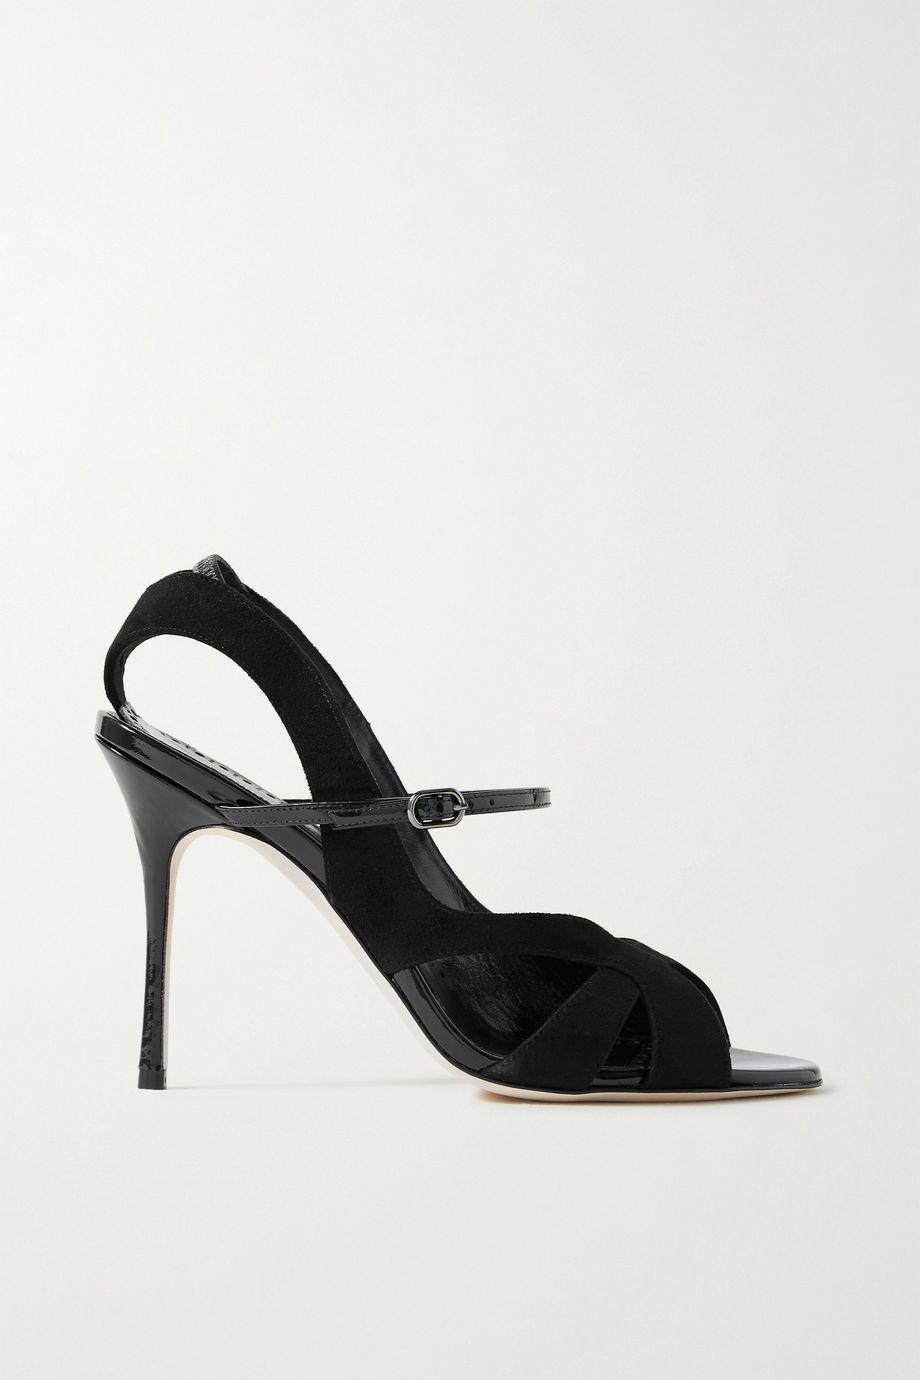 Parado 105 suede and patent-leather sandals by MANOLO BLAHNIK